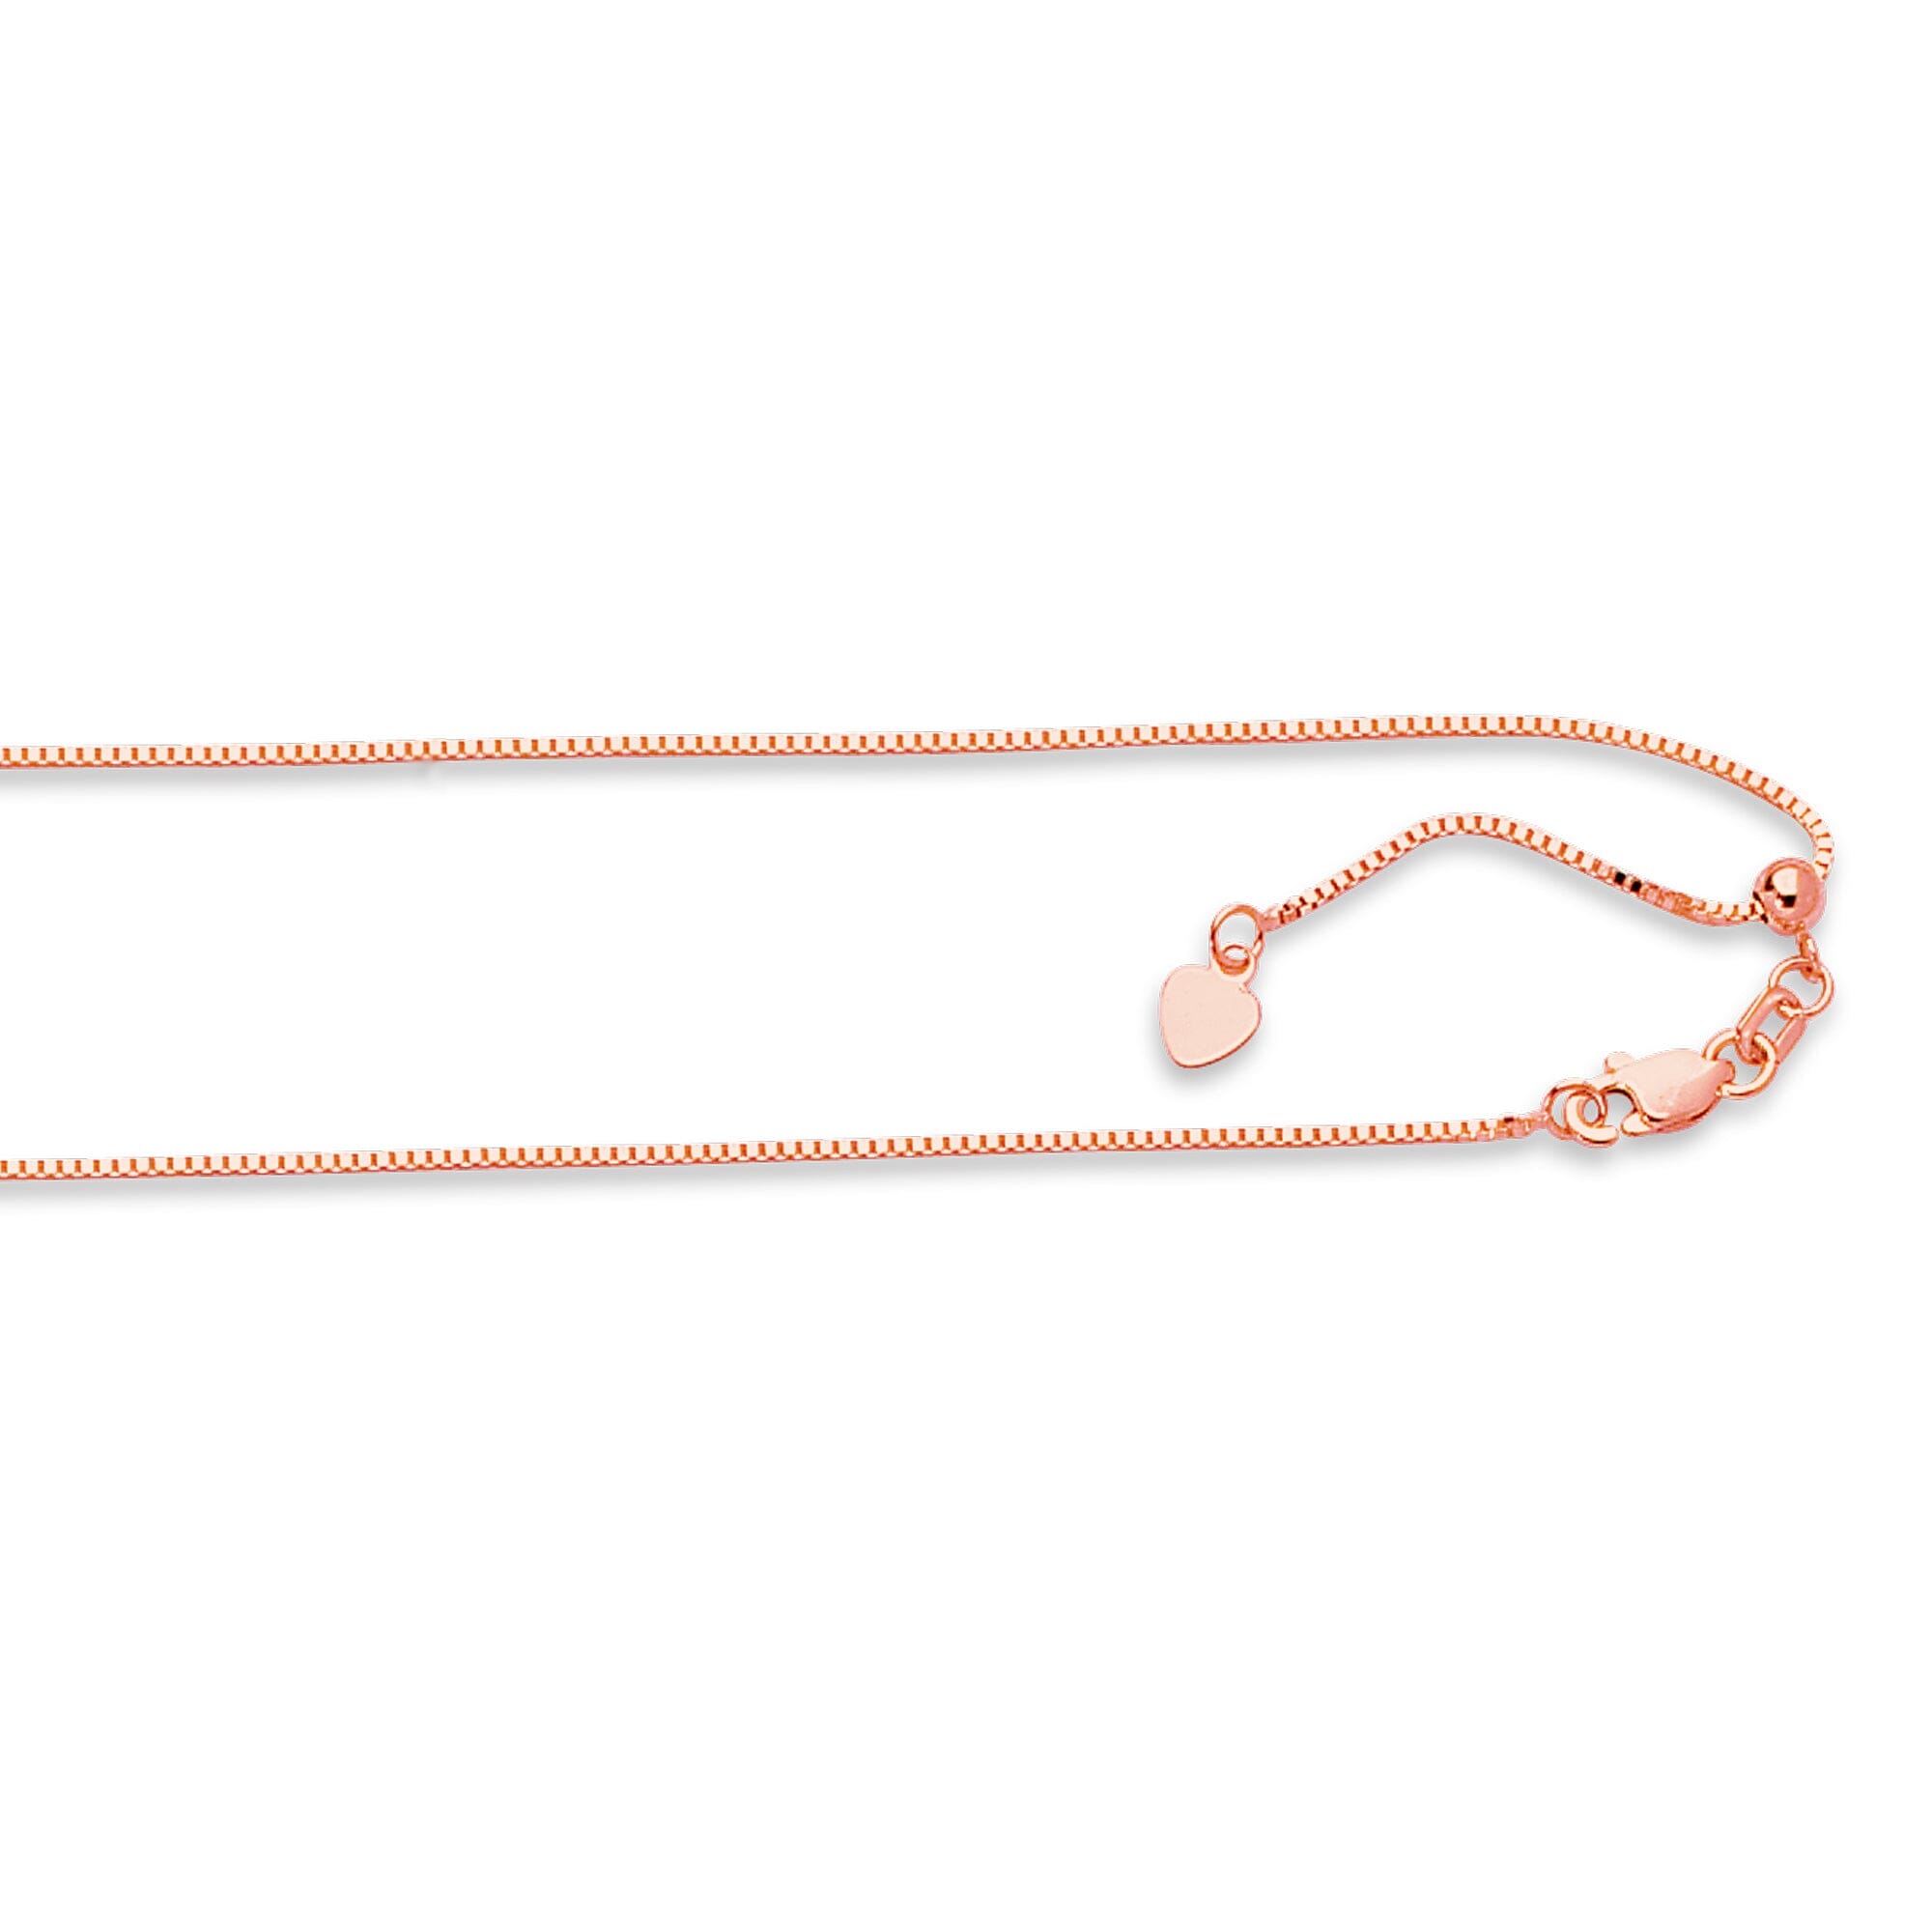 0.7MM Solid Adjustable Box Chain 14K Rose Gold Up to 22